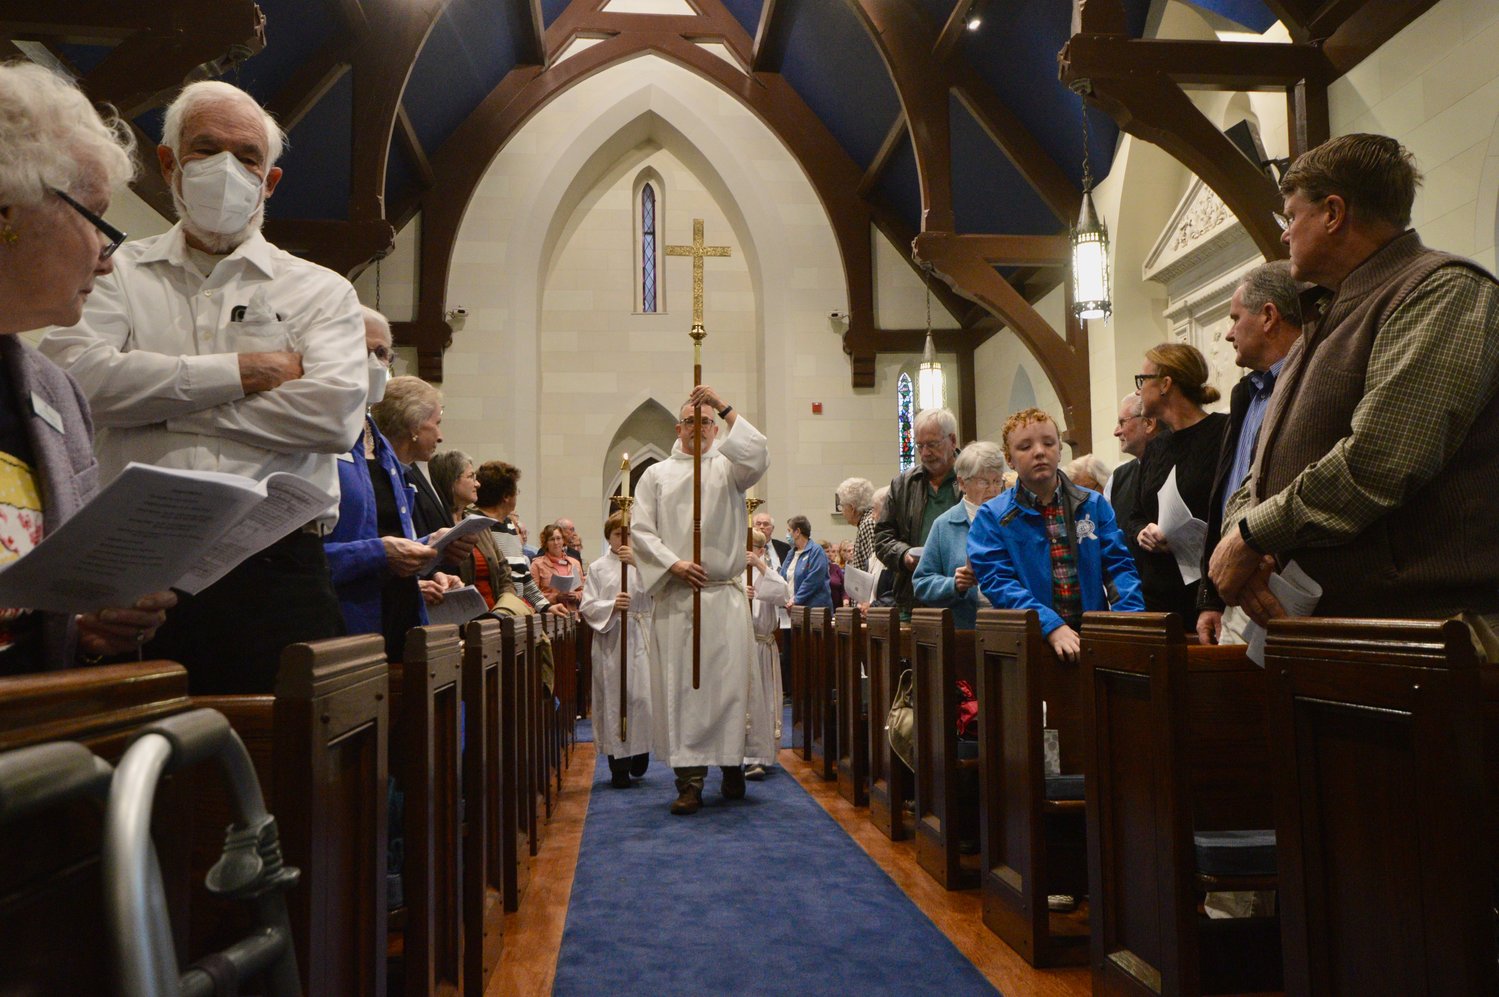 Paul Westrom, who led the first two phases of the renovation project at St. Mary’s Episcopal Church, leads a group of children to the front of the church at the start of the Nov. 13 service, which celebrated the historic chapel’s restoration.